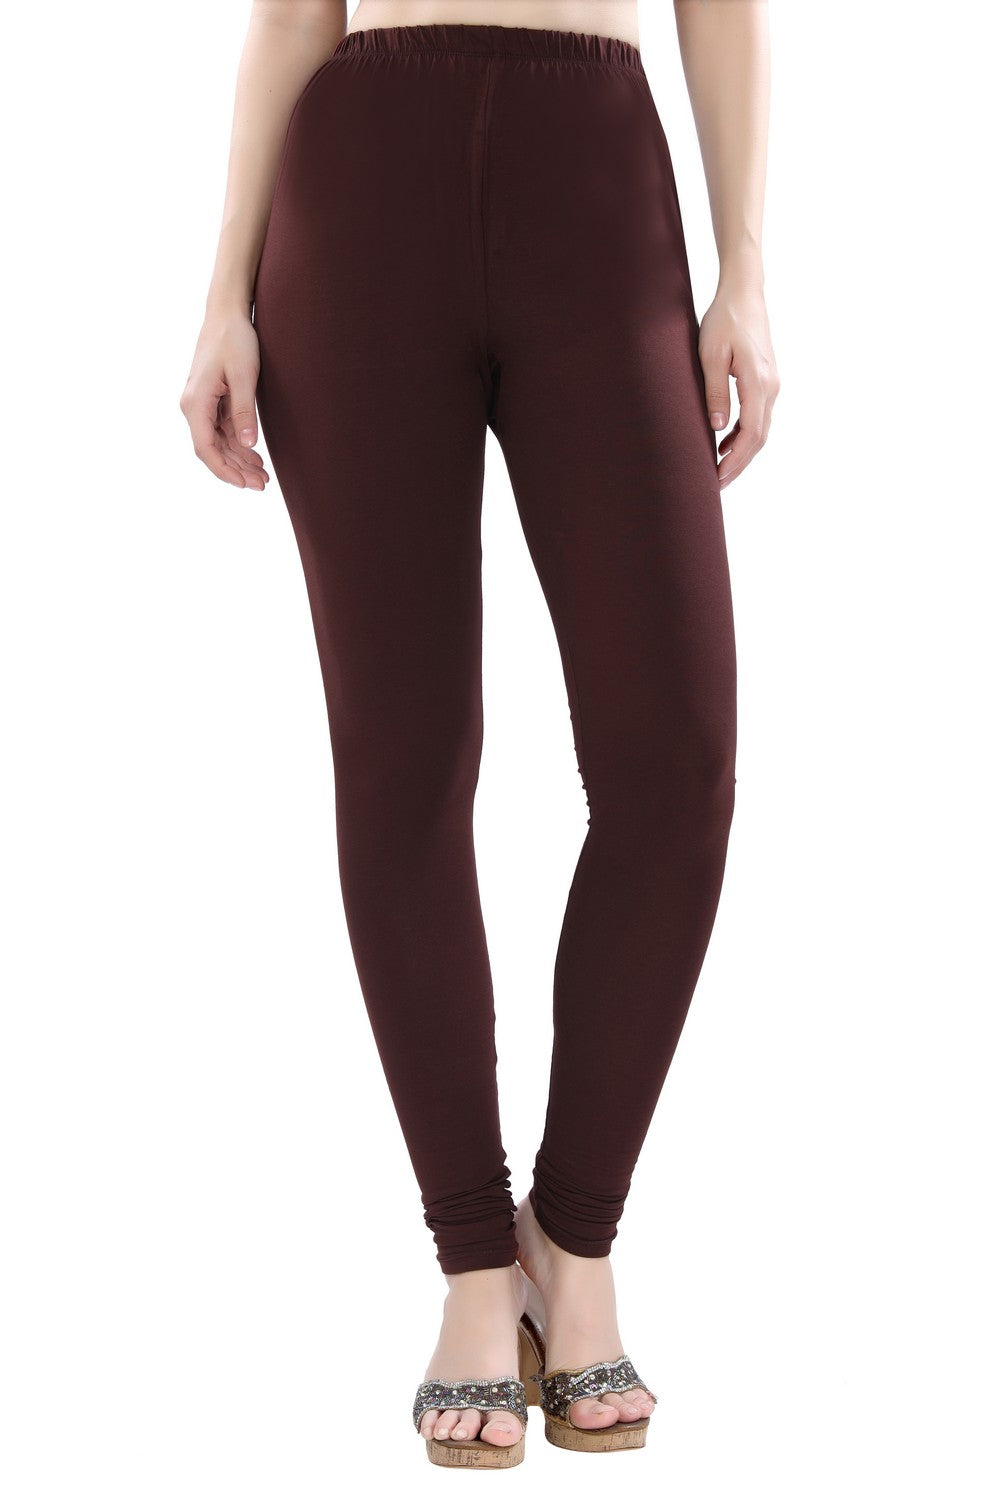 Buy CRZ YOGA Womens UltiDry Workout Leggings 25 Inches  High Waisted Yoga  Pants 78 Athletic Gym Leggings Mineral Brown Large at Amazonin